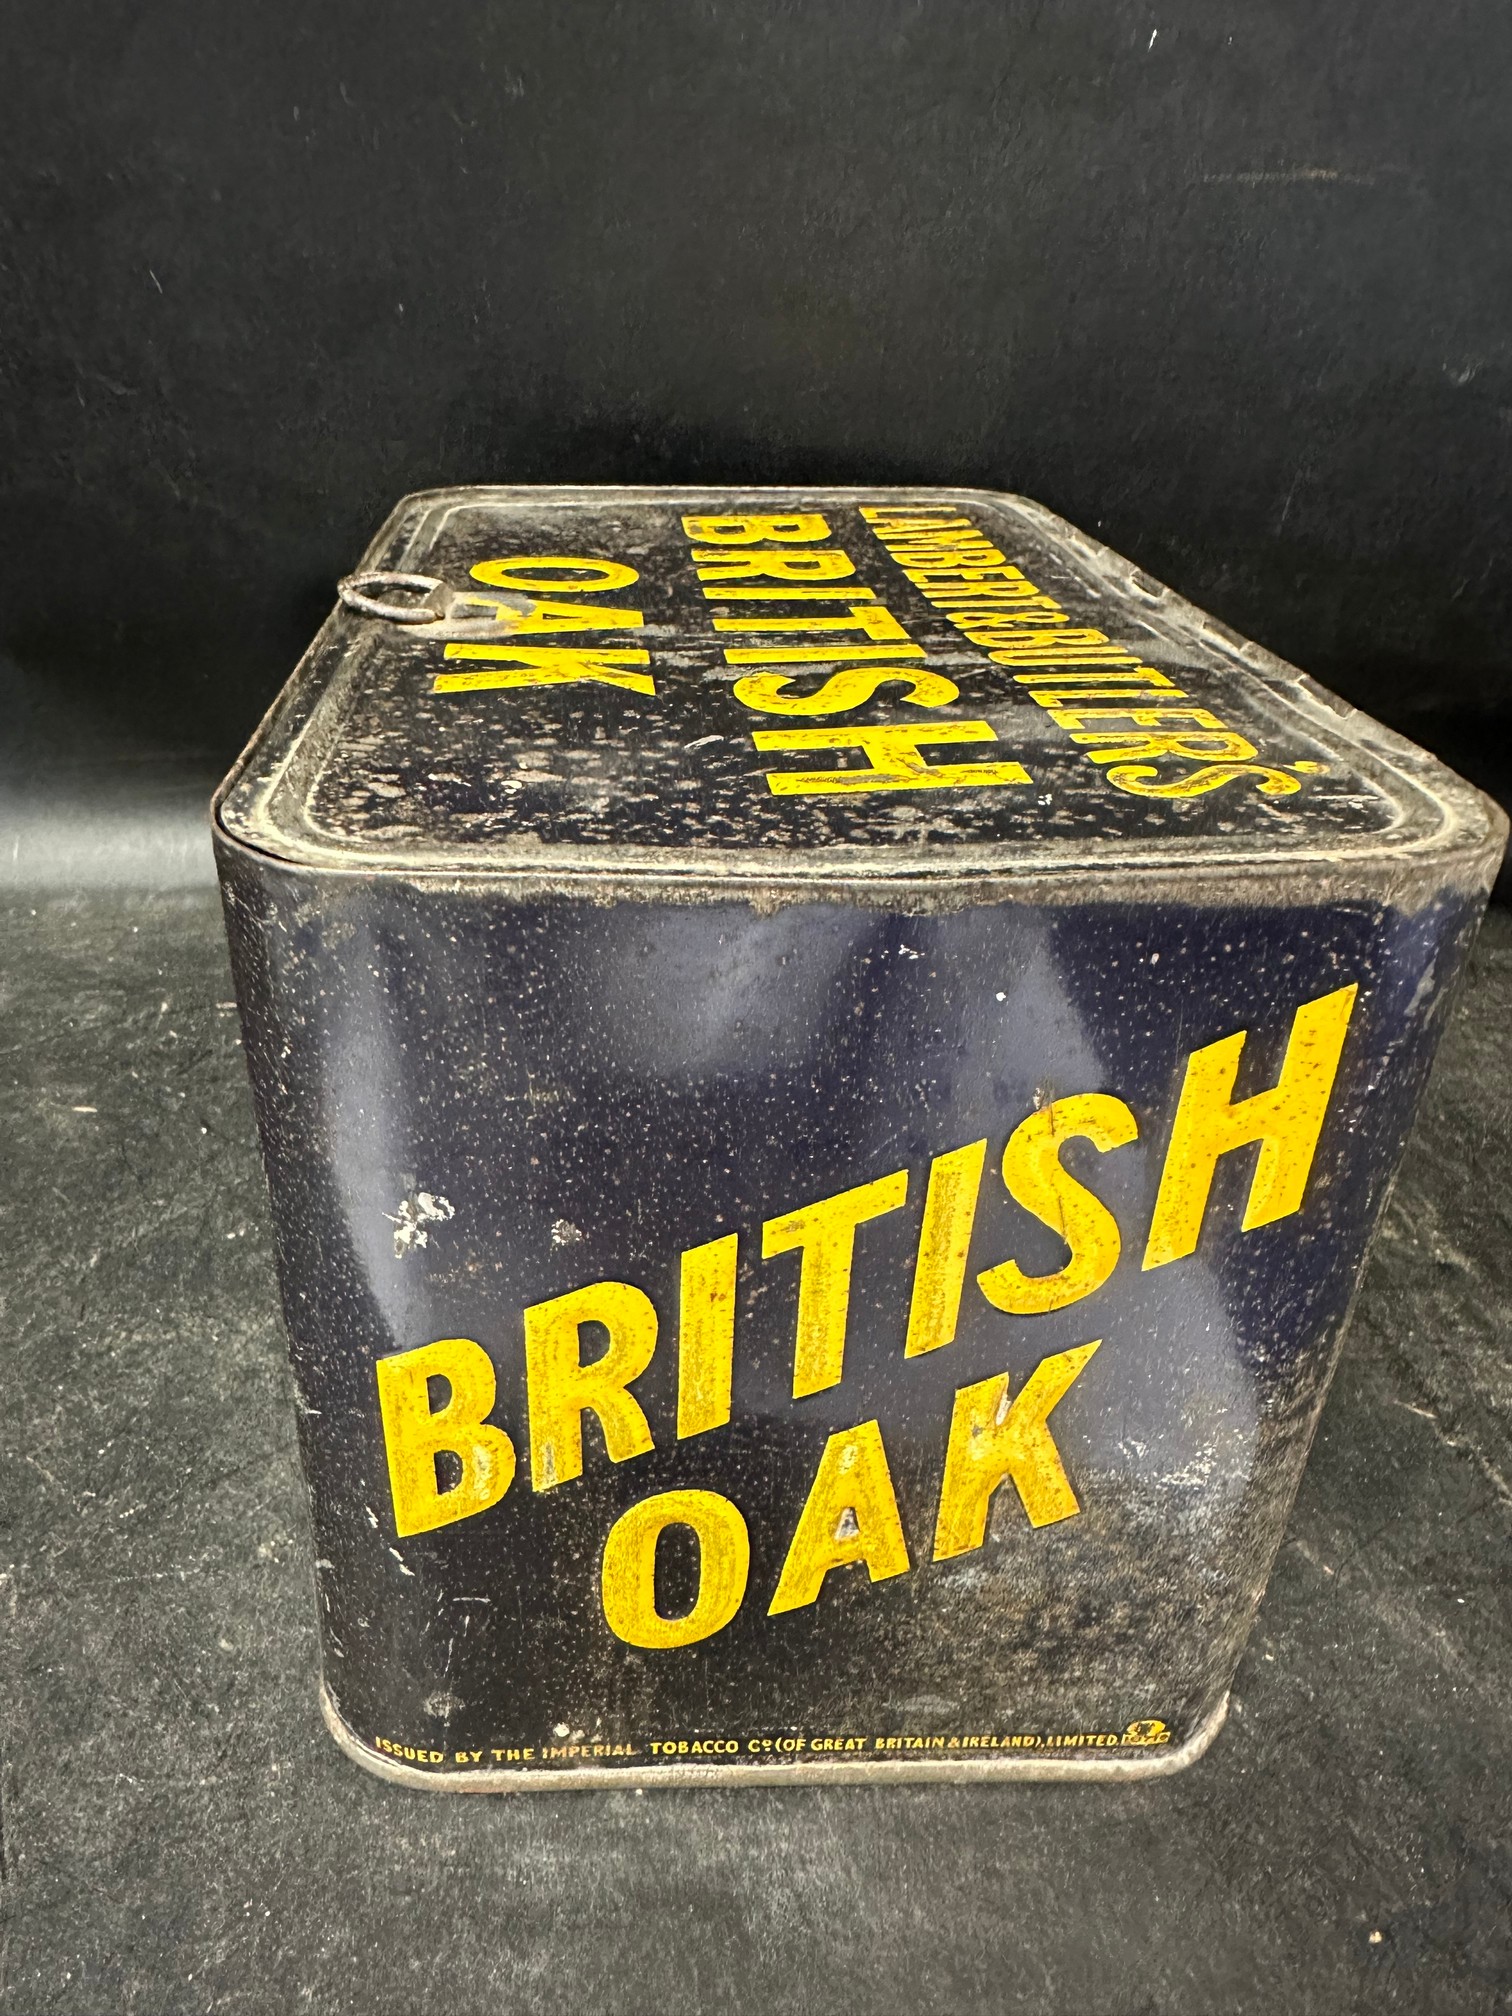 A Lambert & Butler's British Oak in packets and tins only counter box for "British Oak Shag", issued - Image 6 of 8